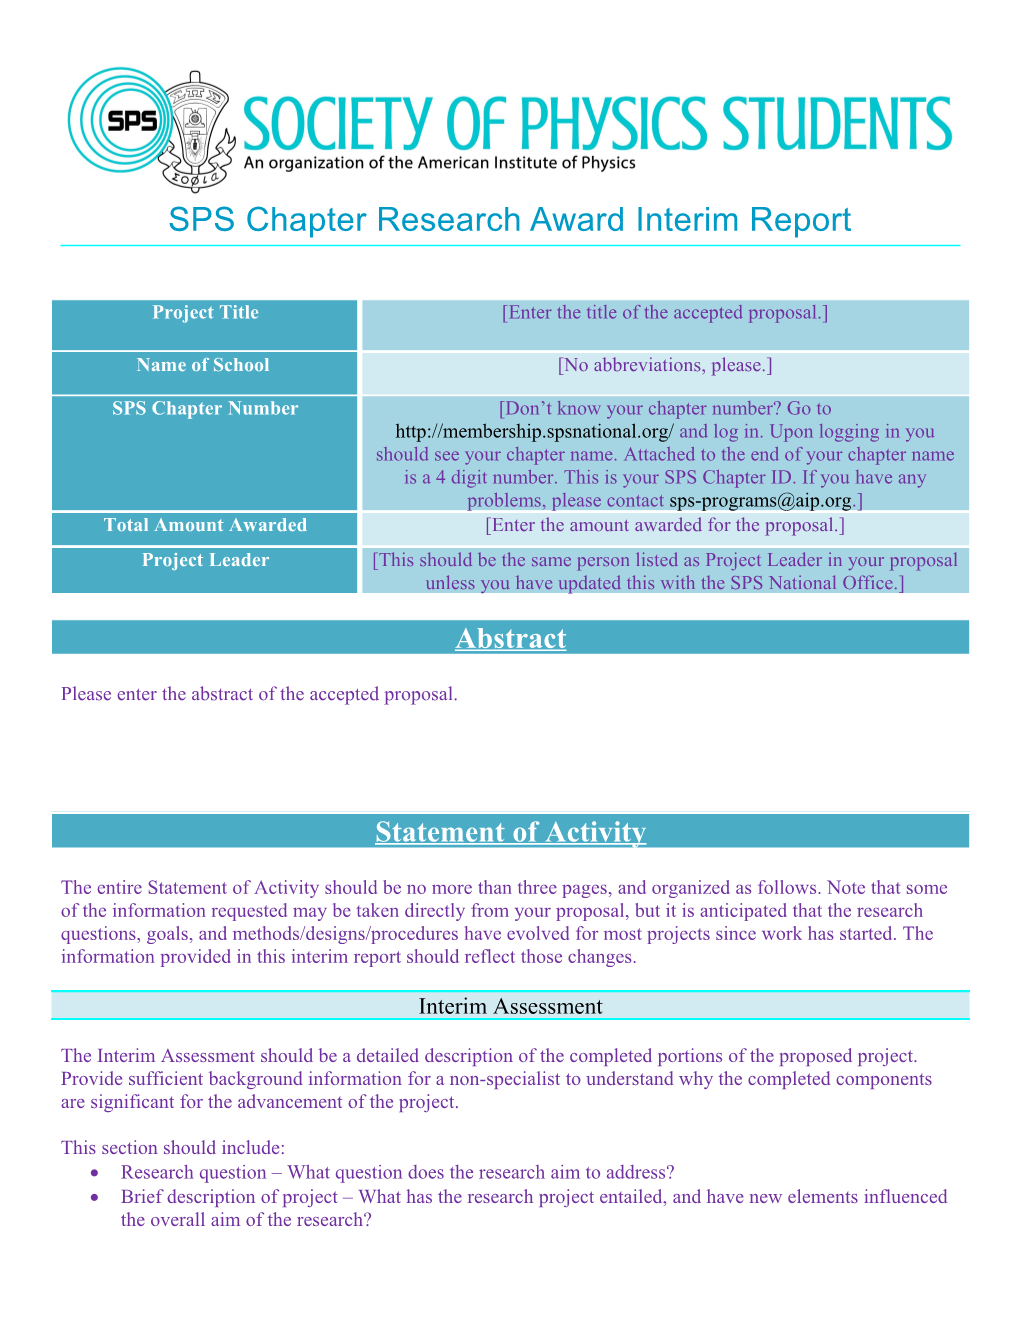 SPS Chapter Research Award Interim Report